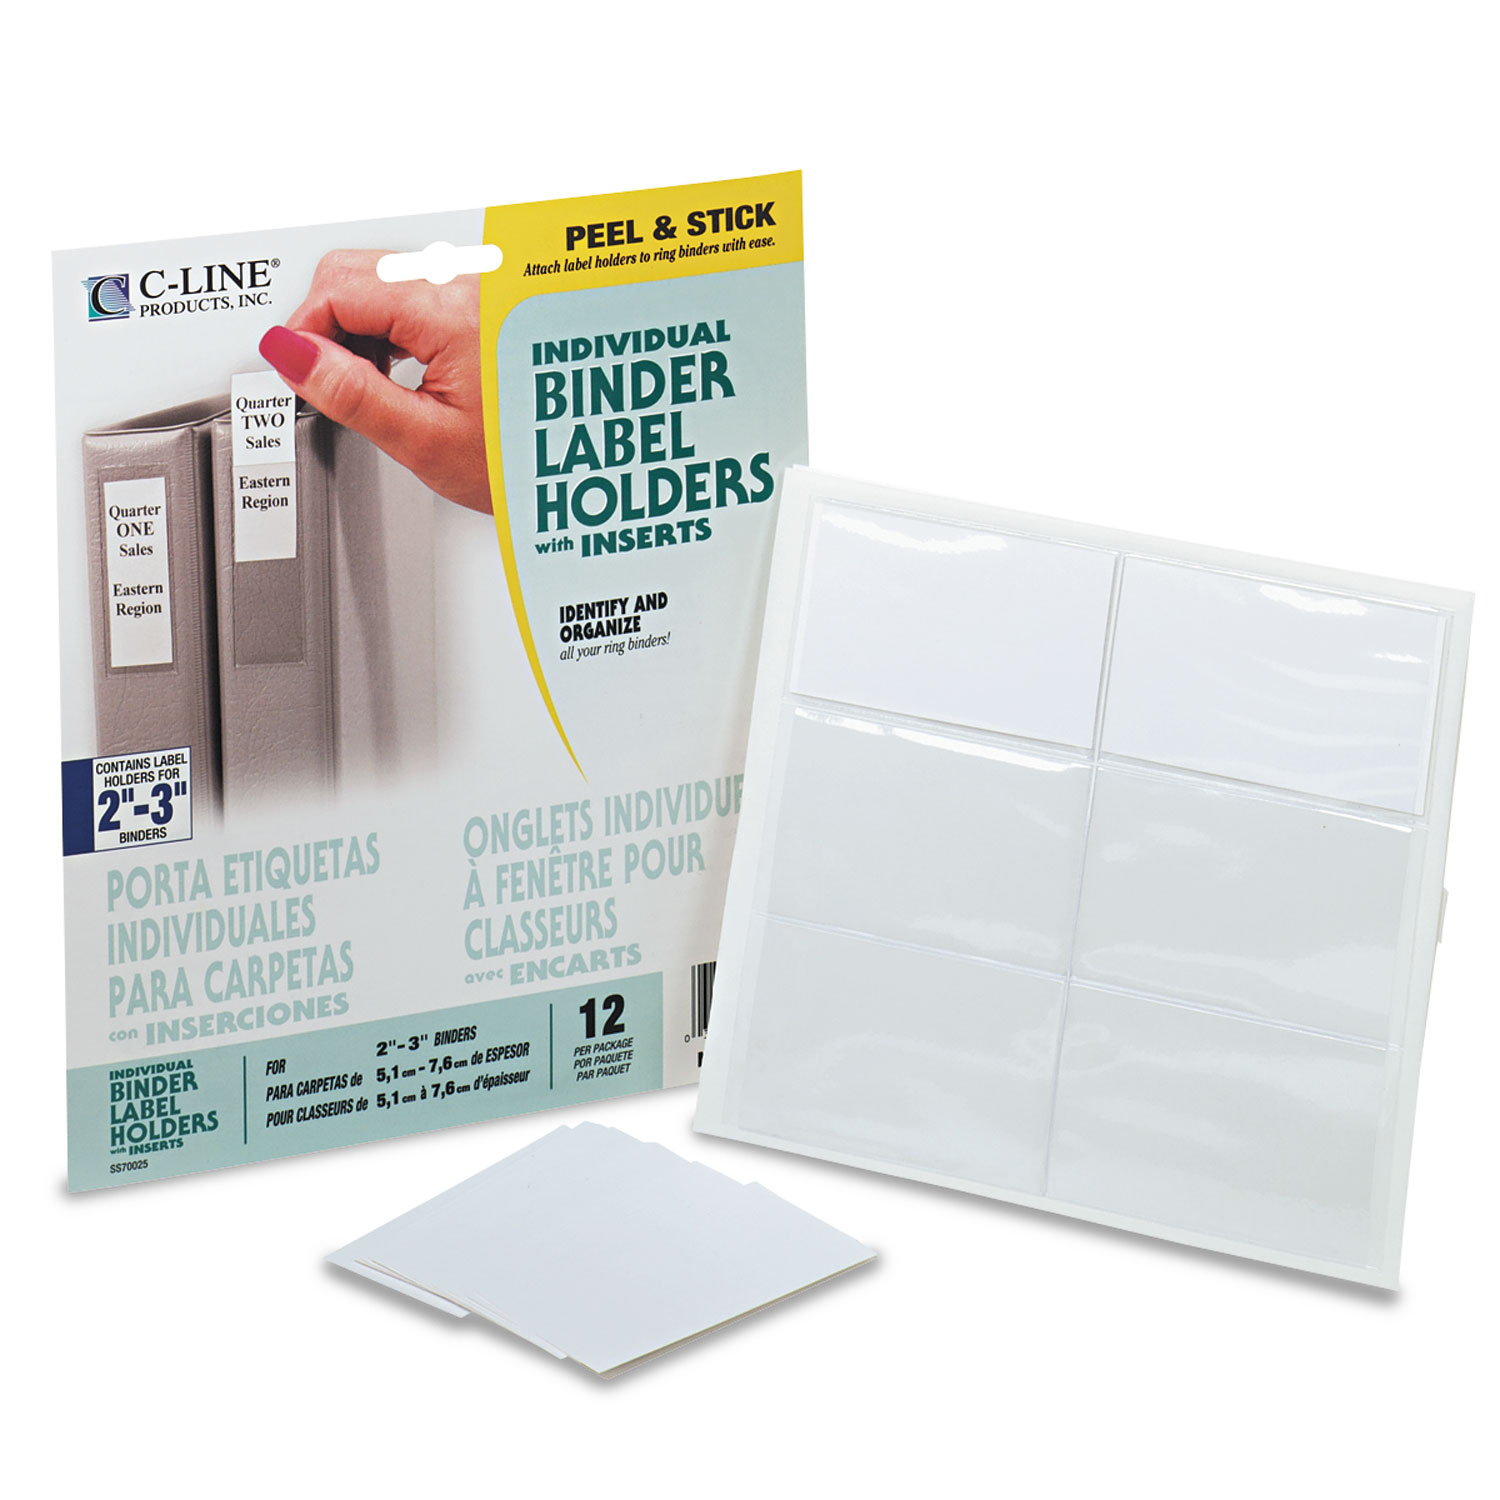 Self-Adhesive Ring Binder Label Holders, Top Load, 1-3/4 x 3-1/4, Clear, 12/Pack